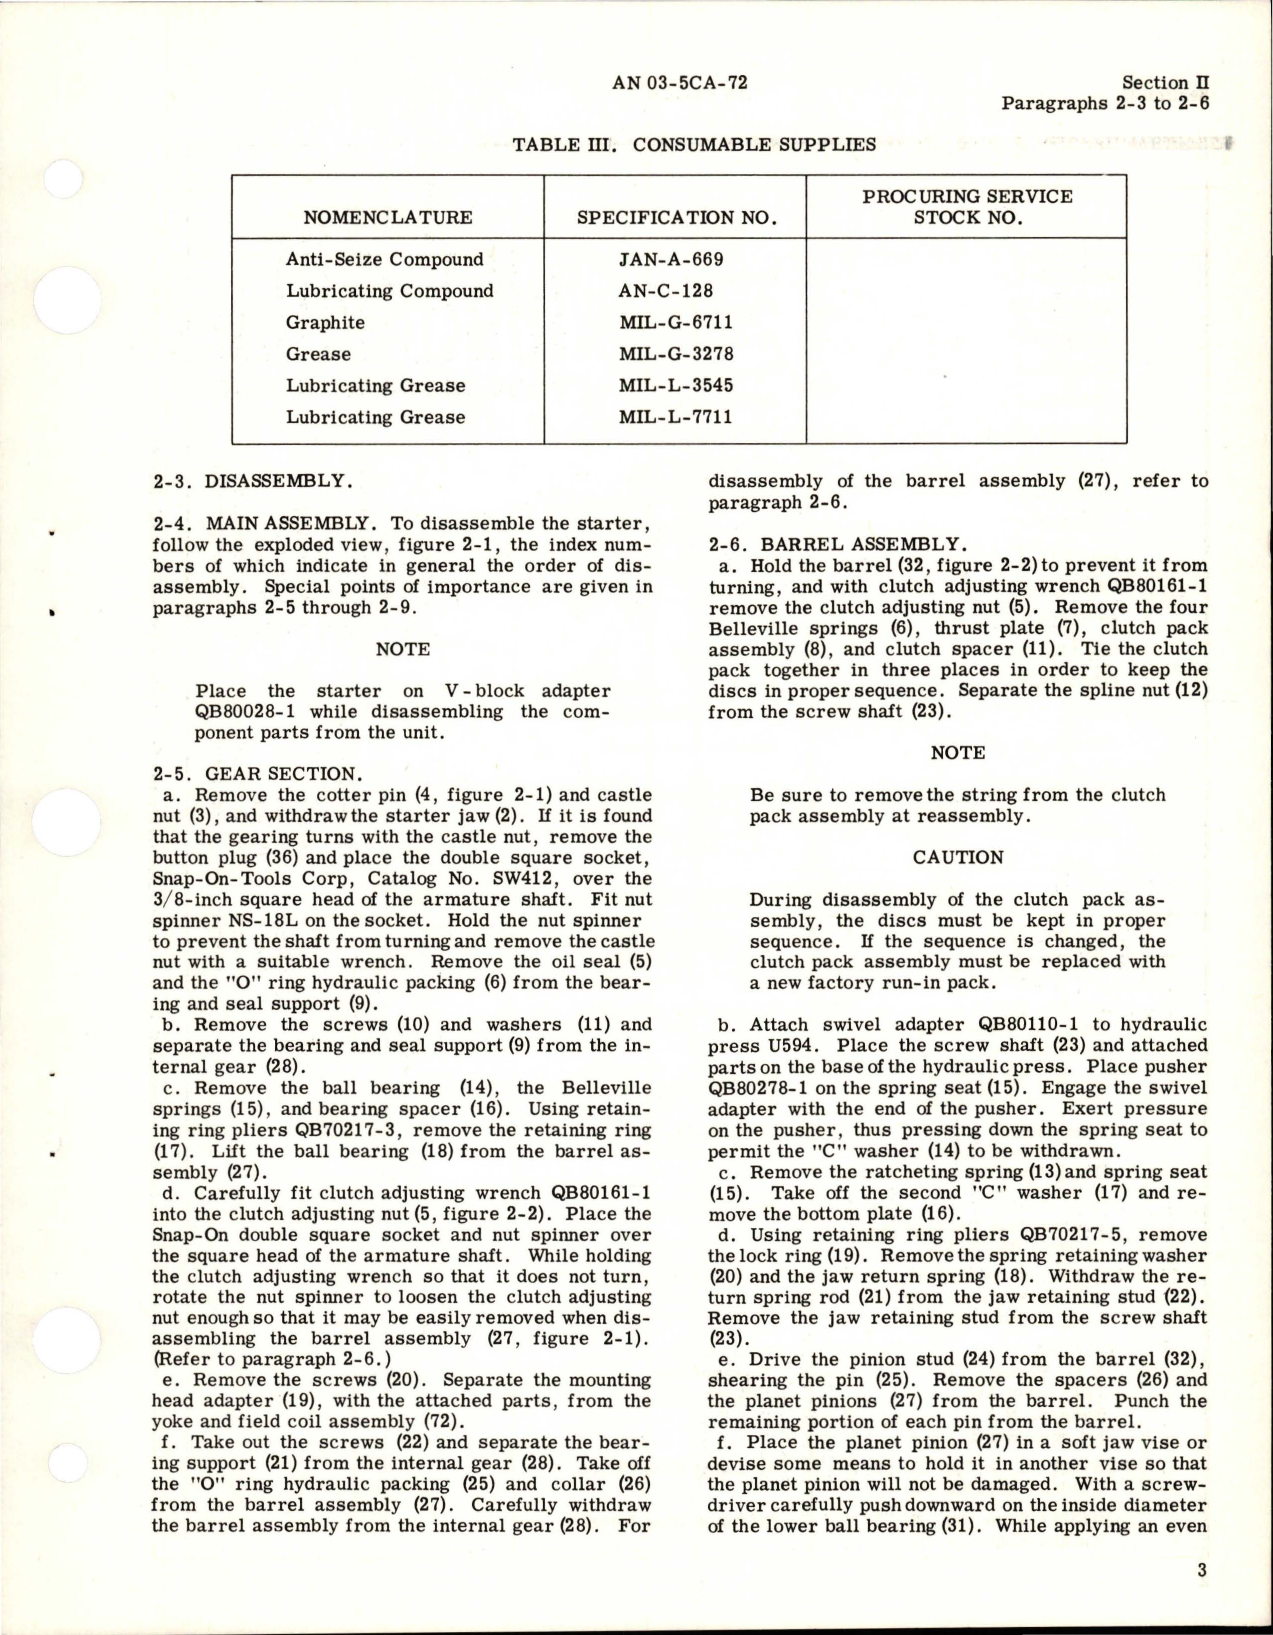 Sample page 7 from AirCorps Library document: Overhaul Instructions for Starters